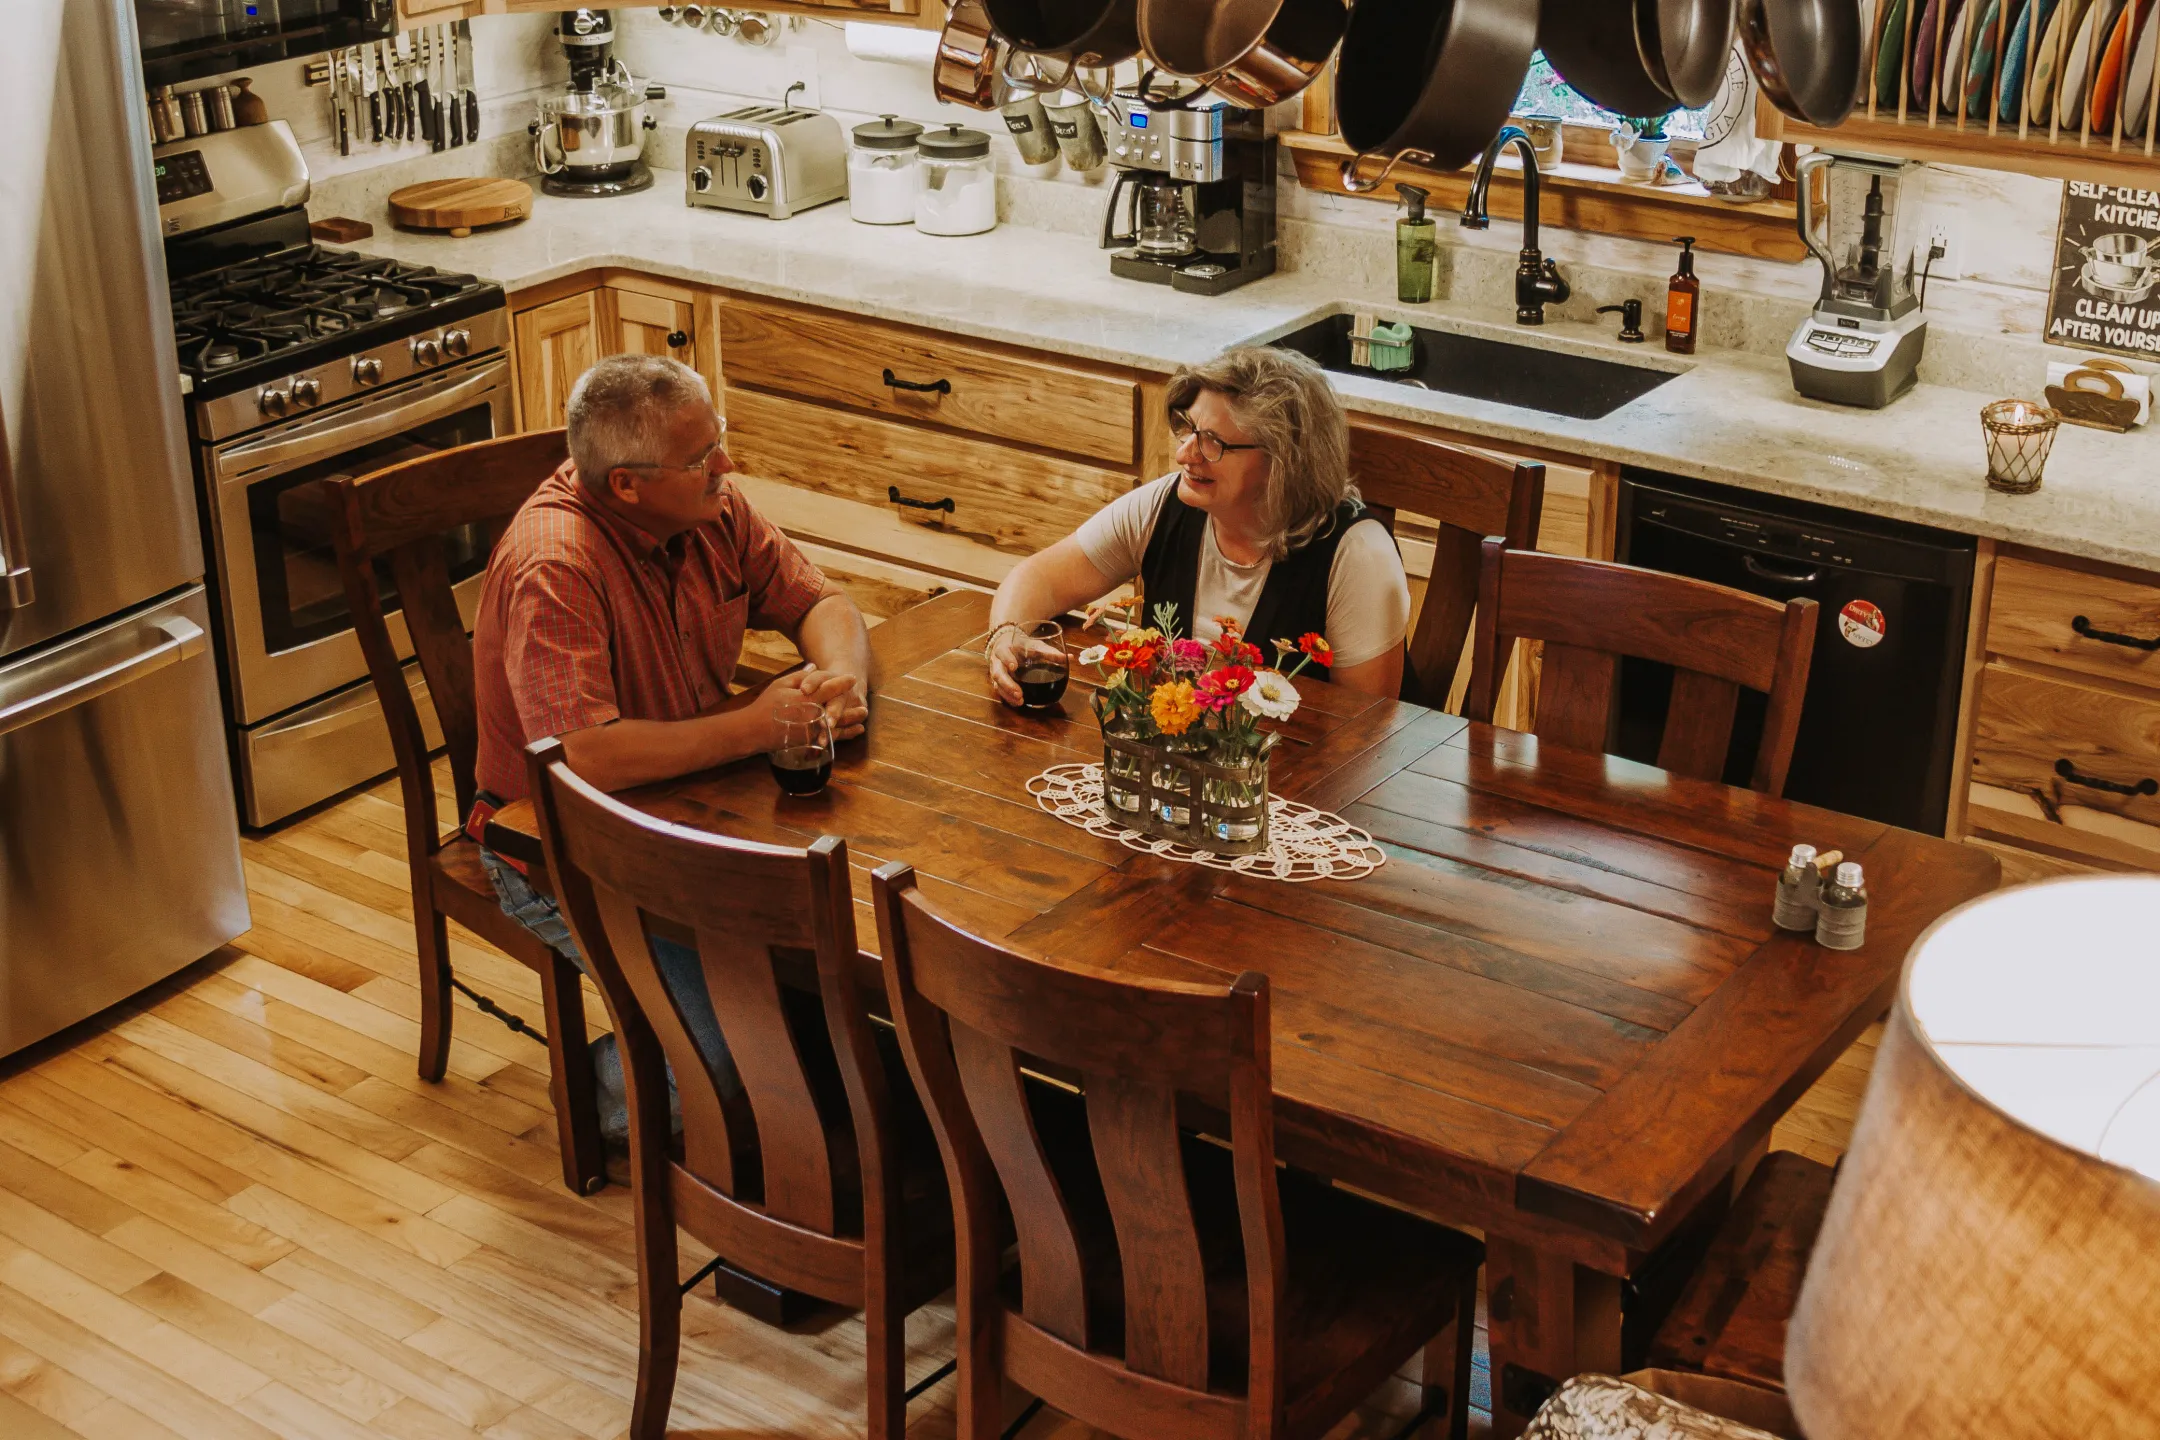 Couple at Rustic Dining Table